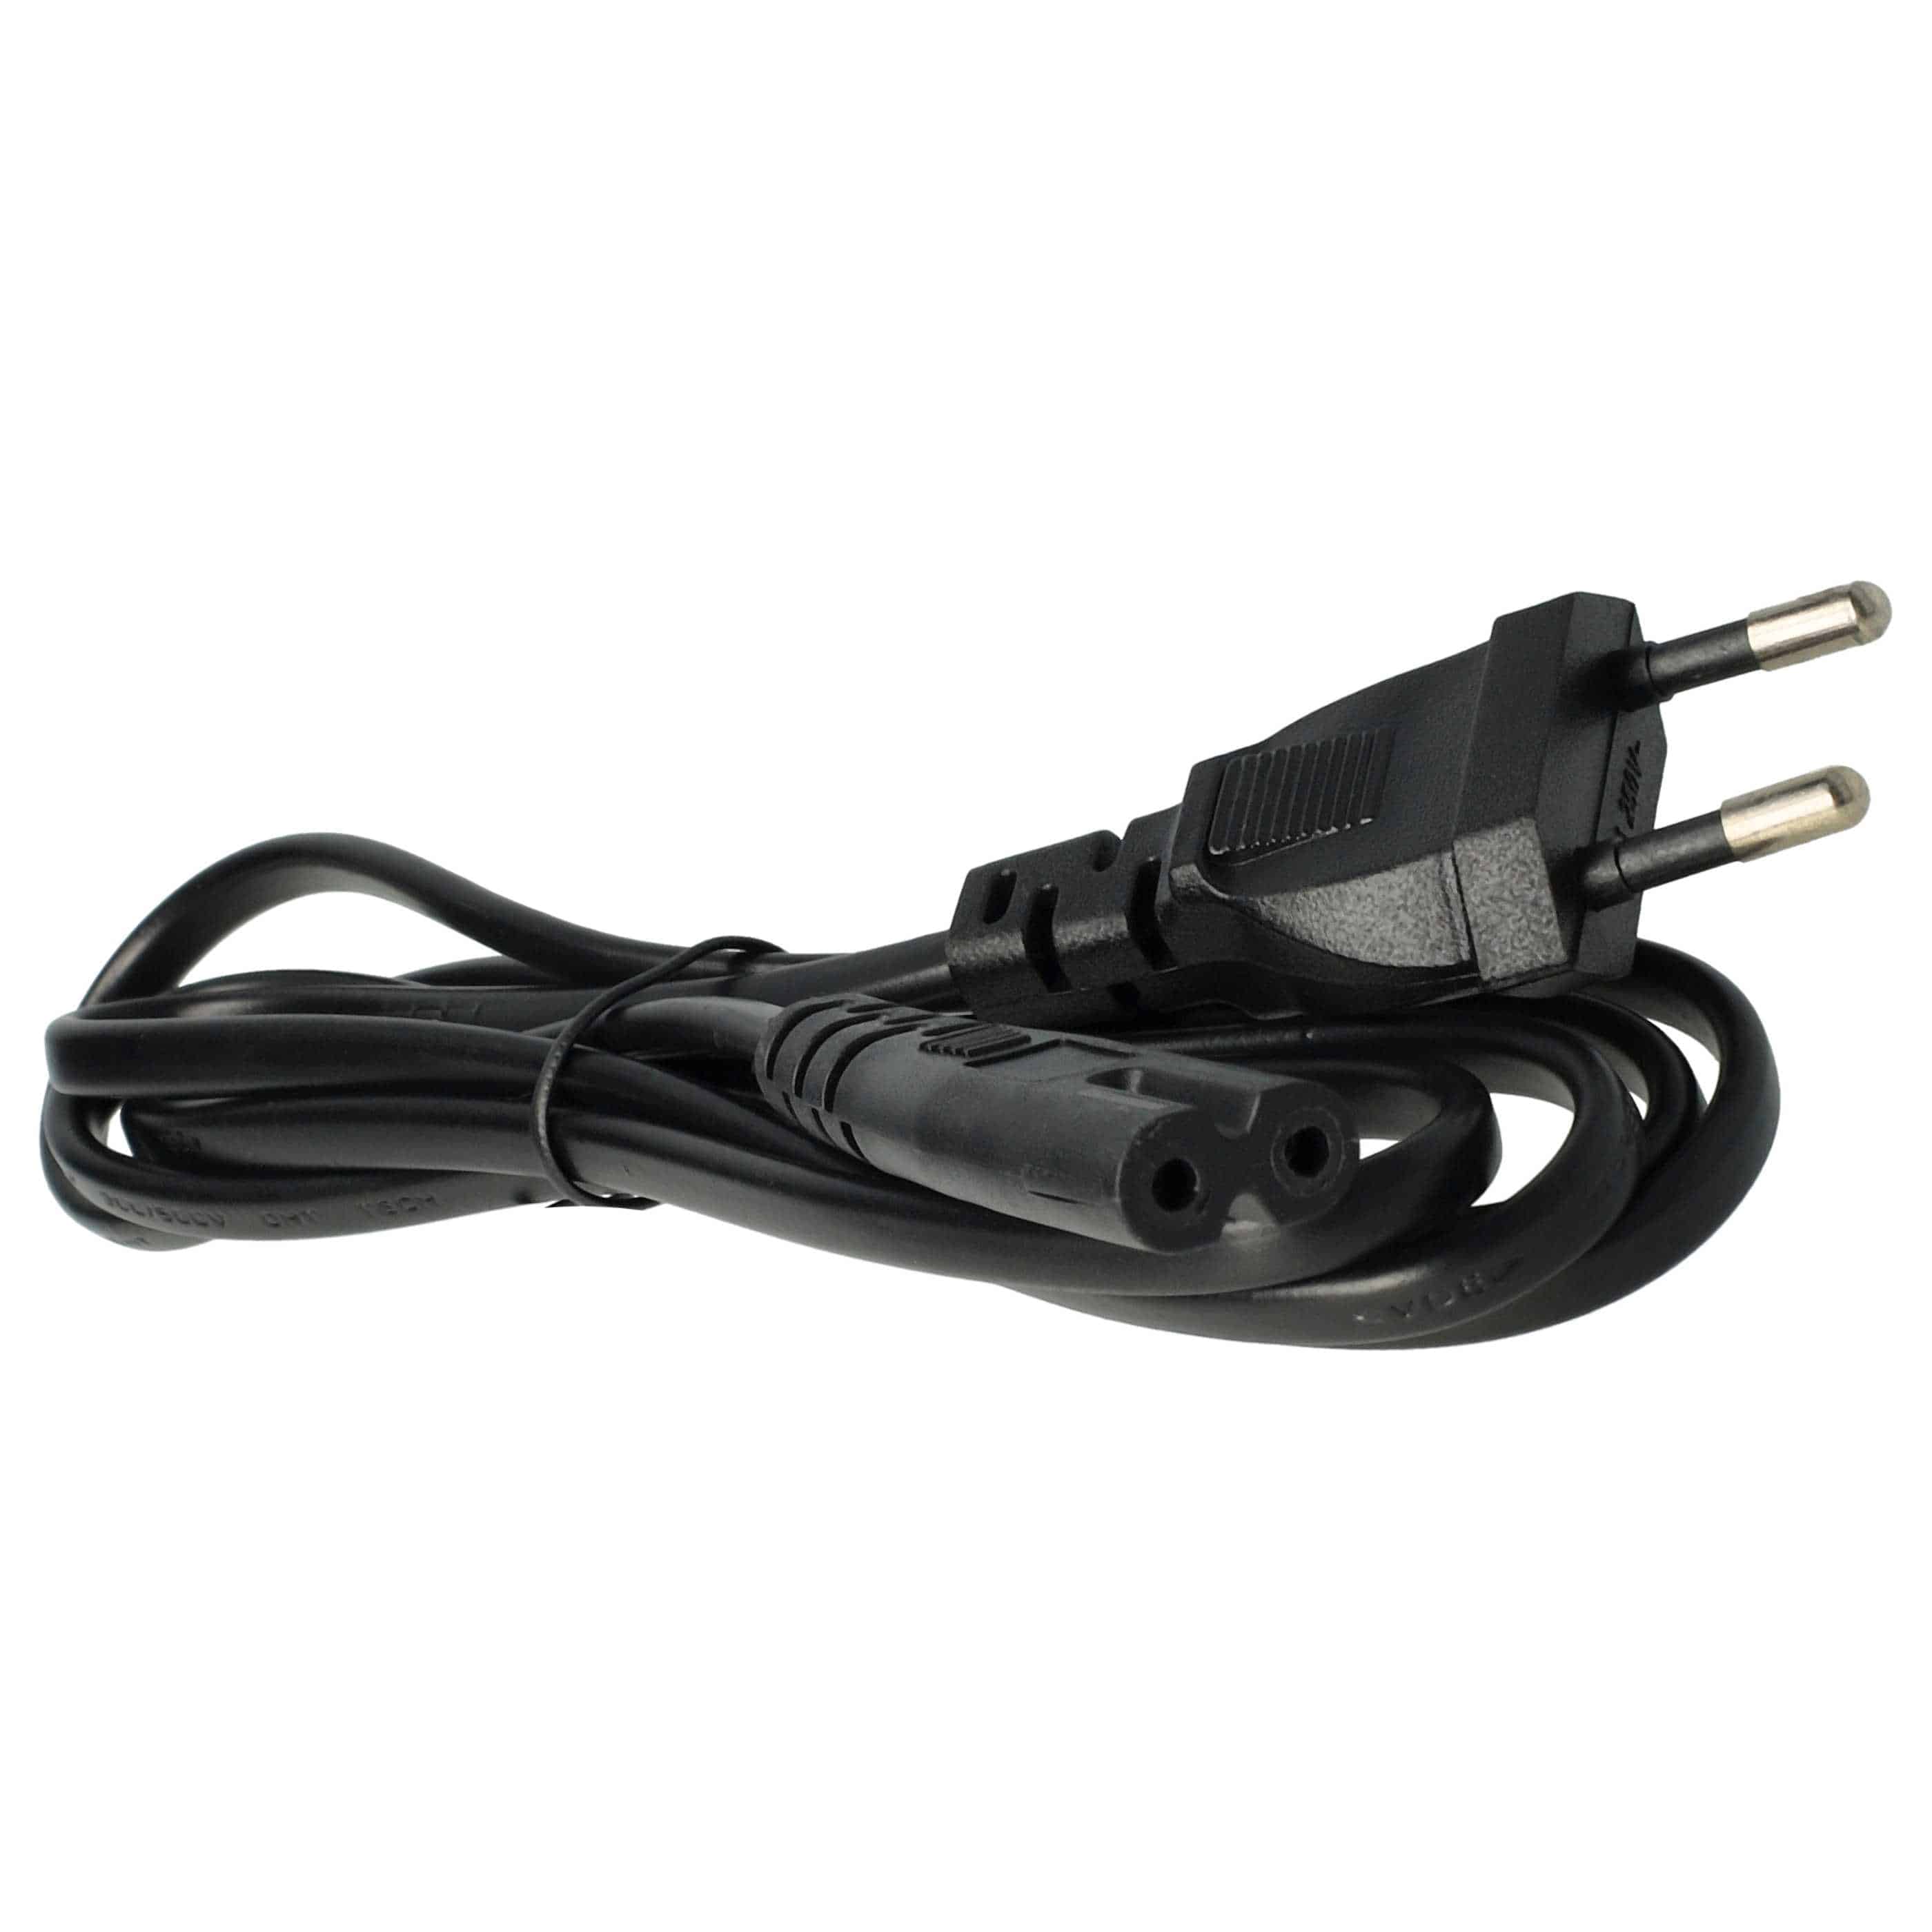 Mains Power Adapter replaces Dell 310-5422 for DellNotebook, 60 W